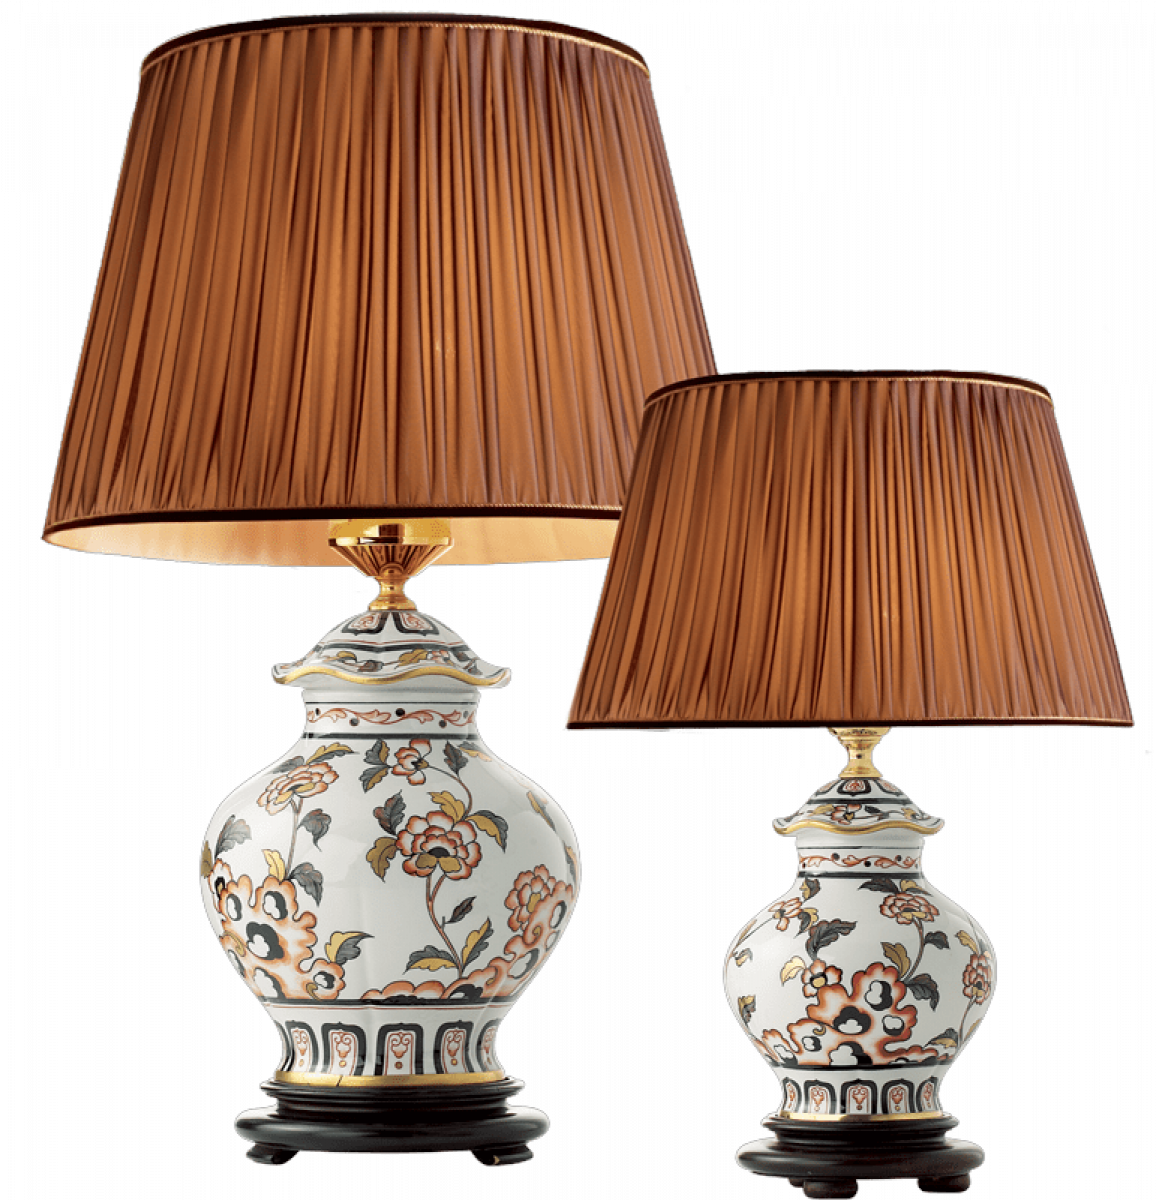 TABLE LAMP 2449